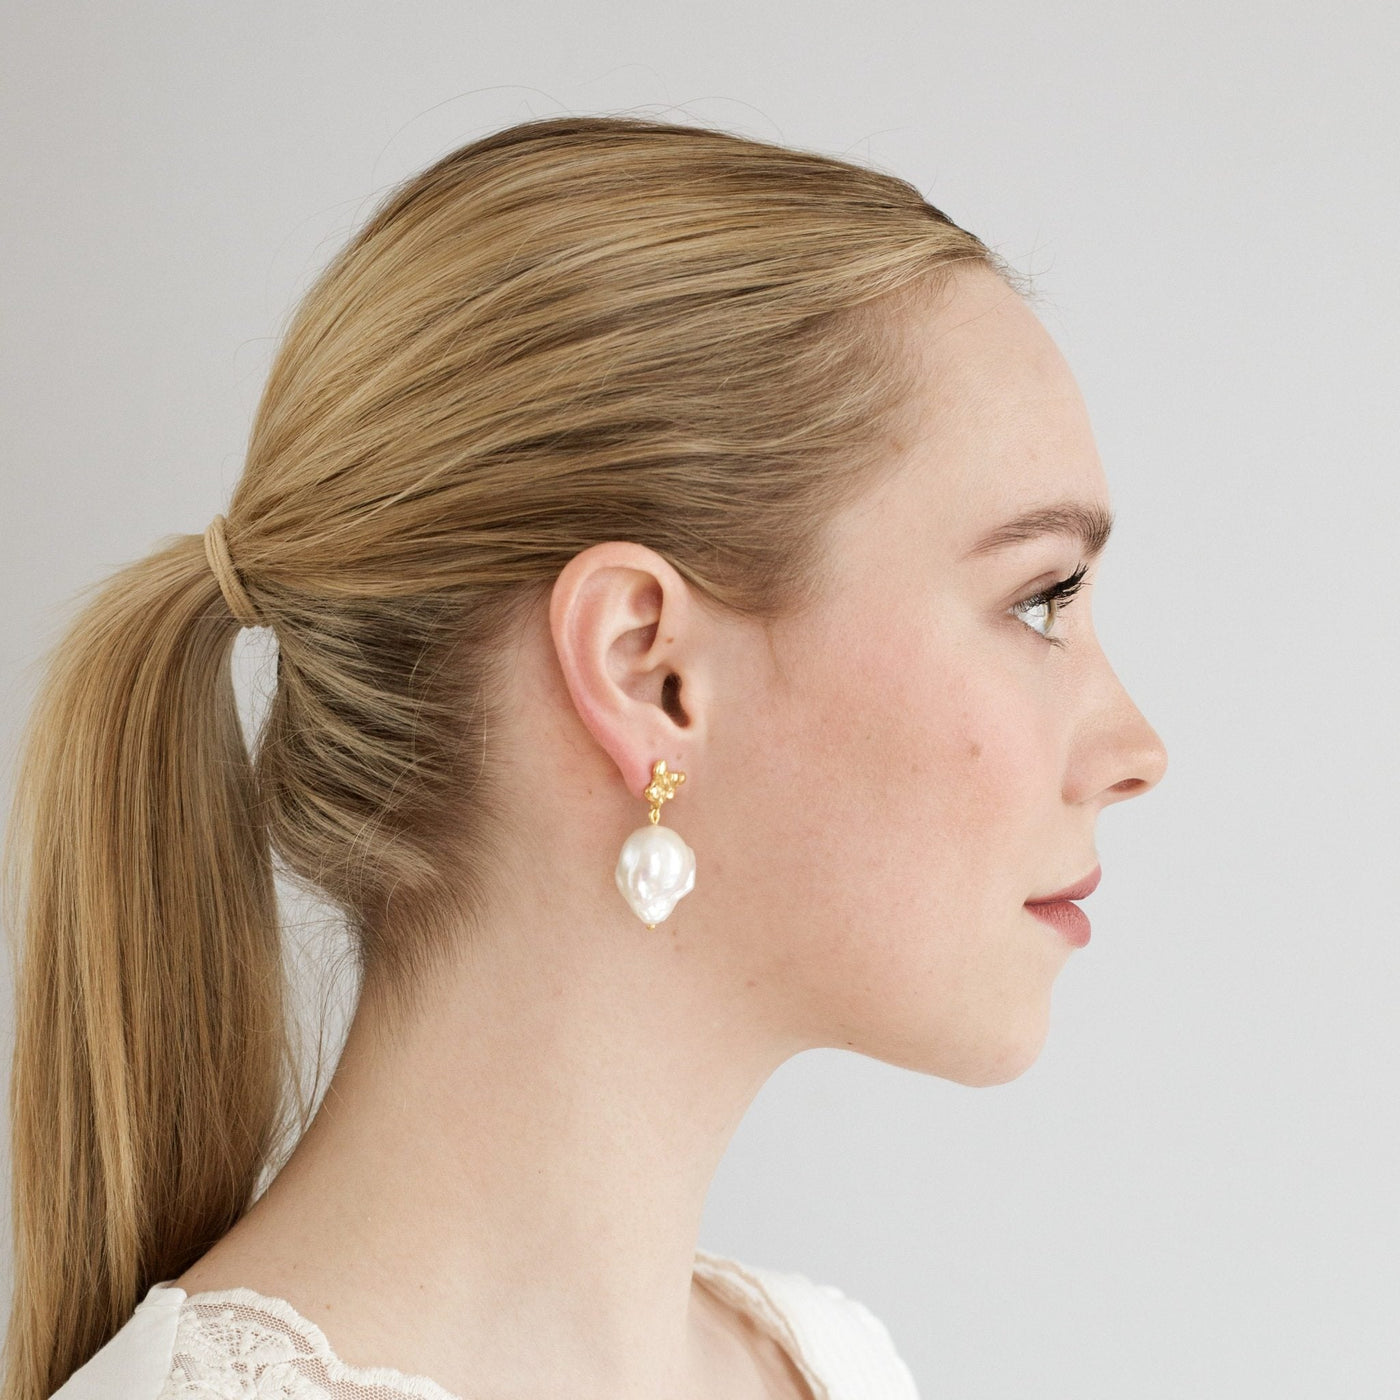 Bridal jewelry FJELLSTRAND 585 GOLD (14k) // Ear studs with baroque pearls